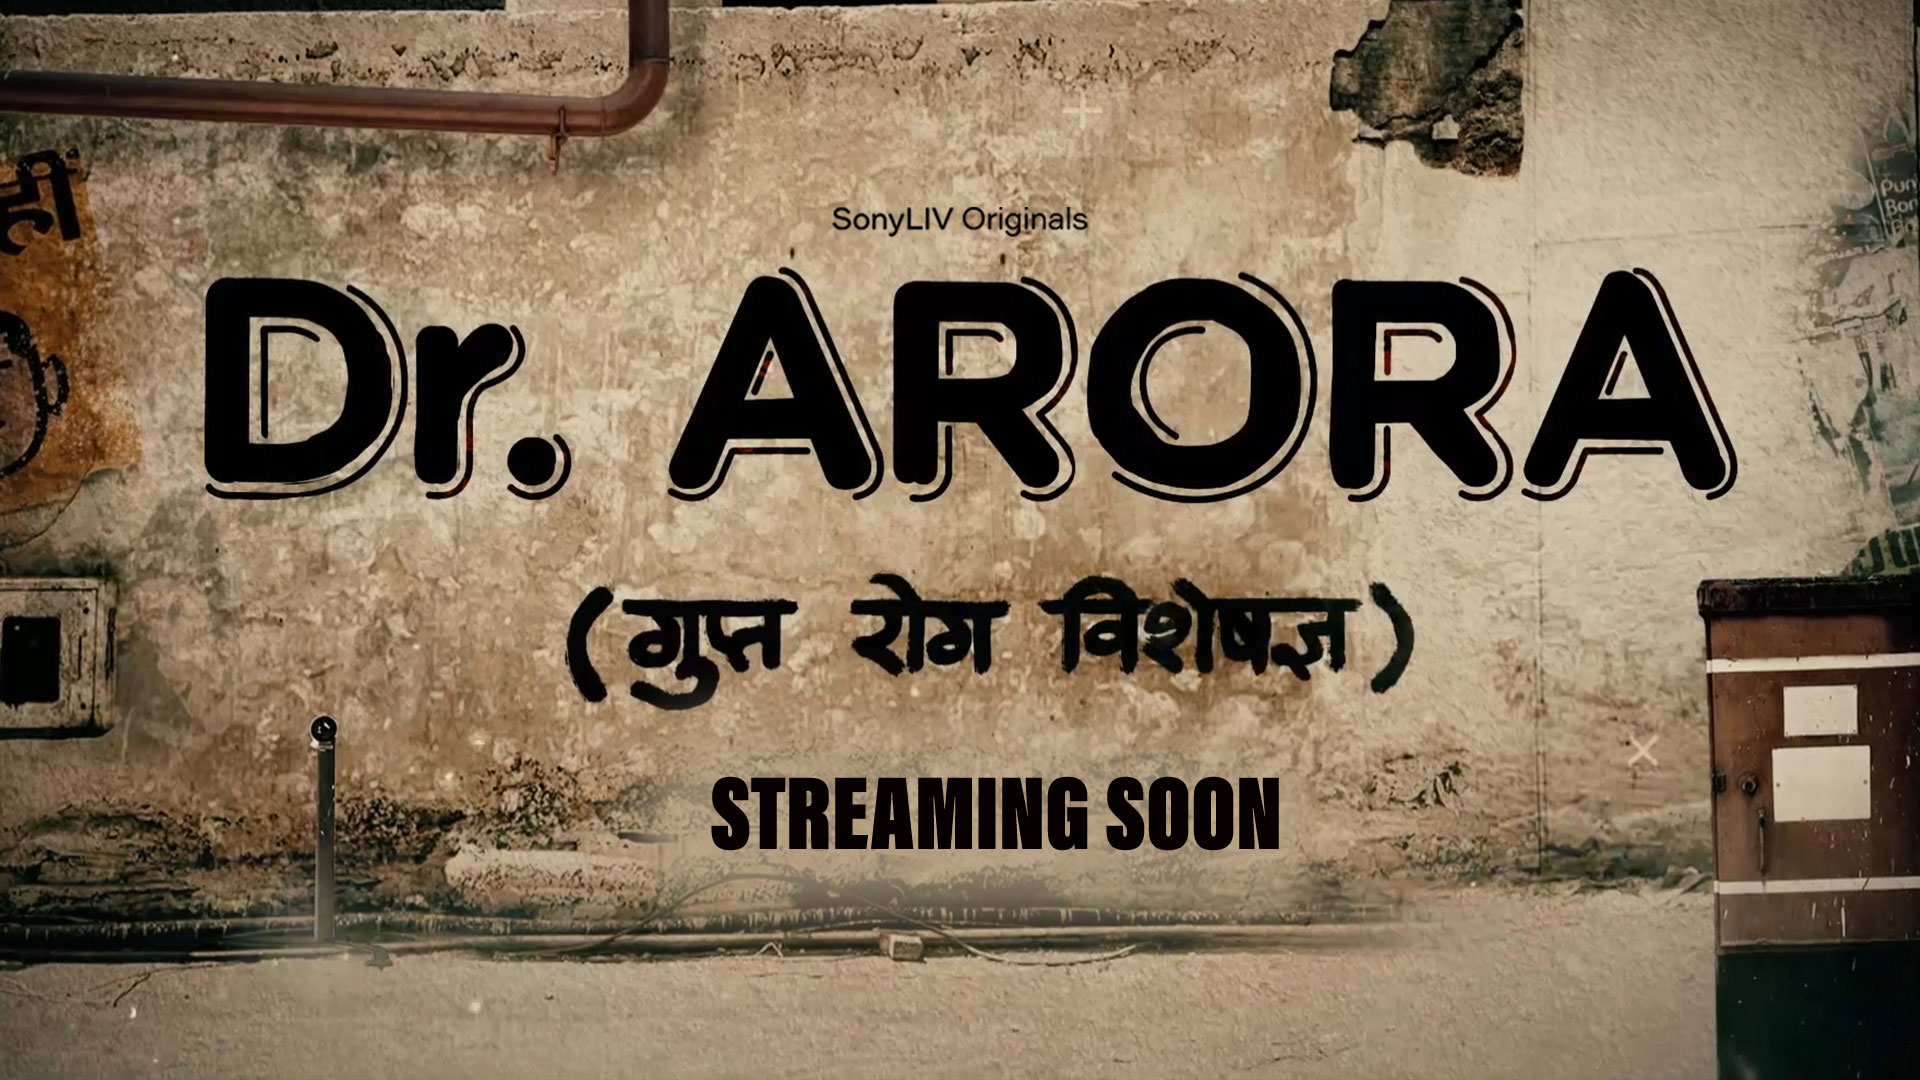 Trailer of Dr. Arora releases on Tuesday